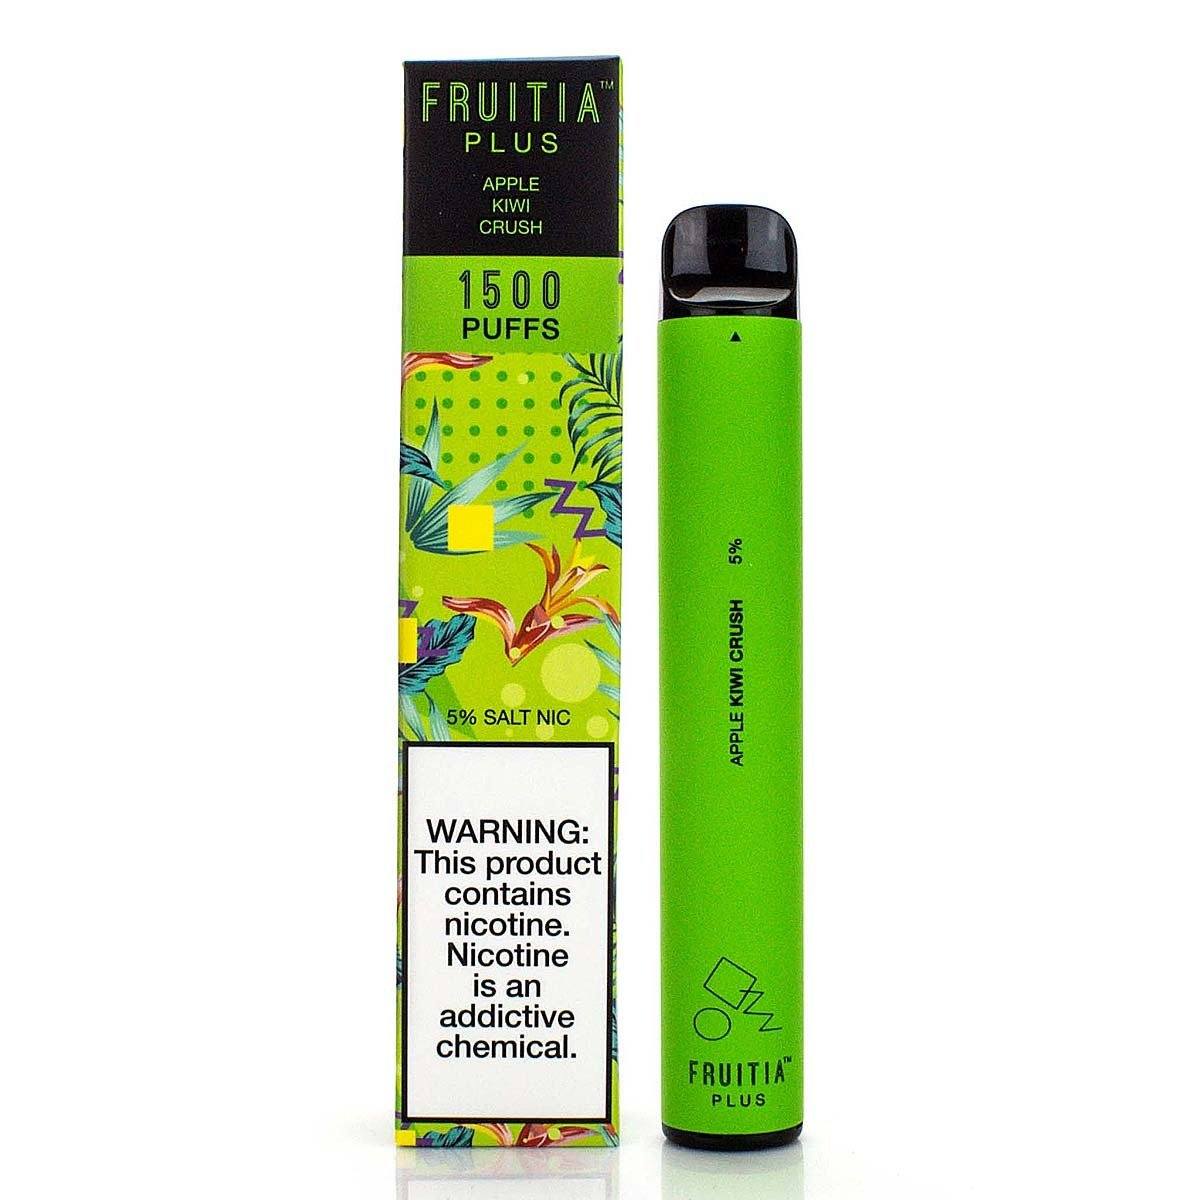 Fruitia Plus Disposable Device | 1500 Puffs Apple Kiwi Crush with Packaging